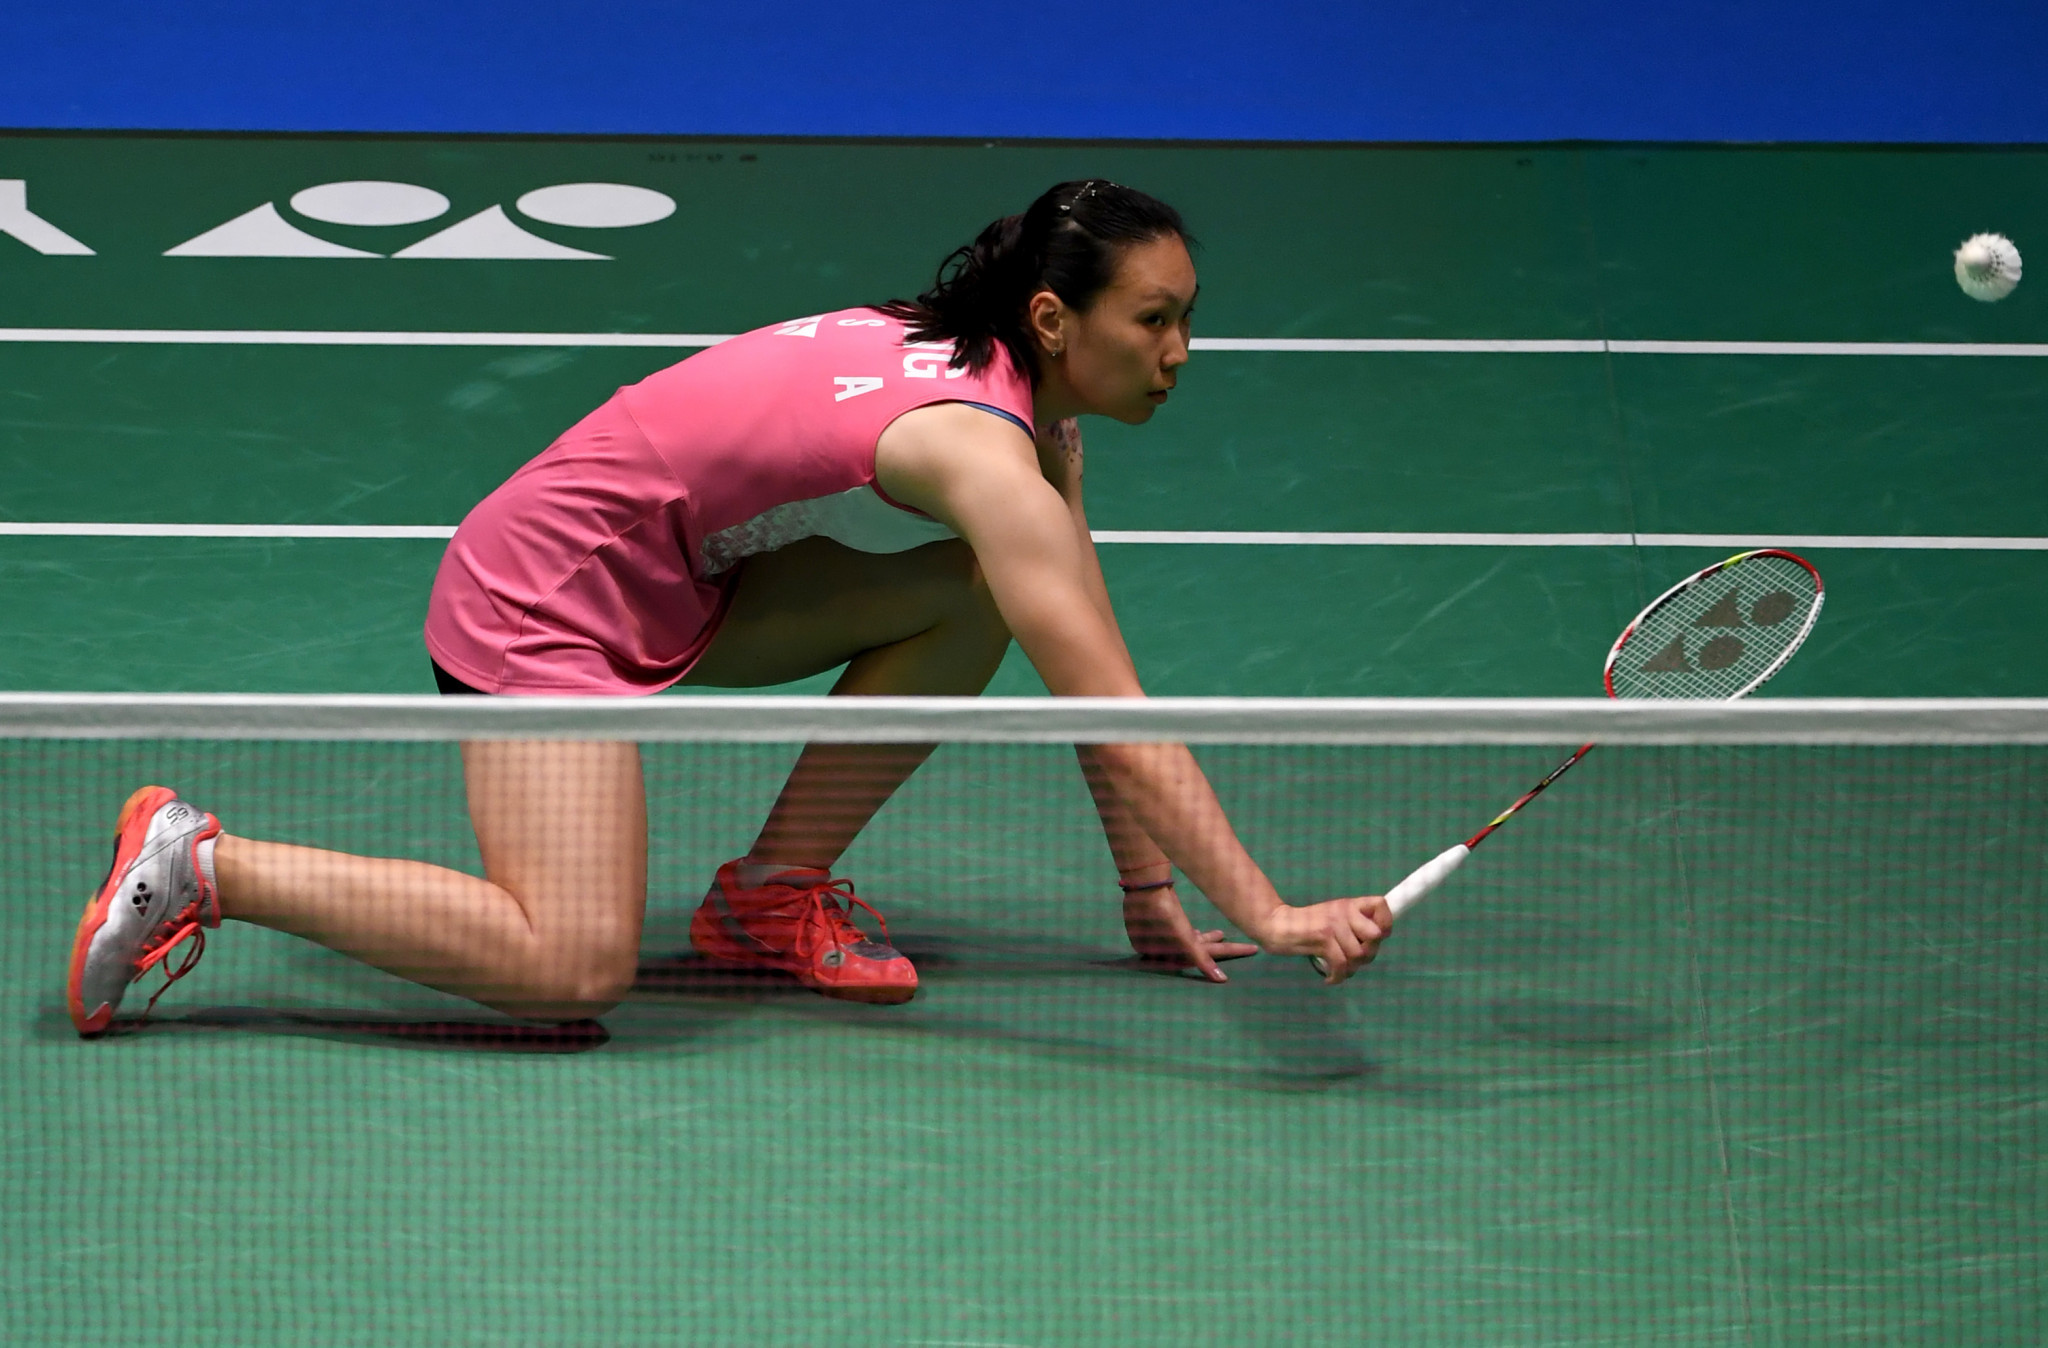 Top seed Beiwen Zhang of the United States safely negotiated her opening round contest at the BWF Dutch Open ©Getty Images